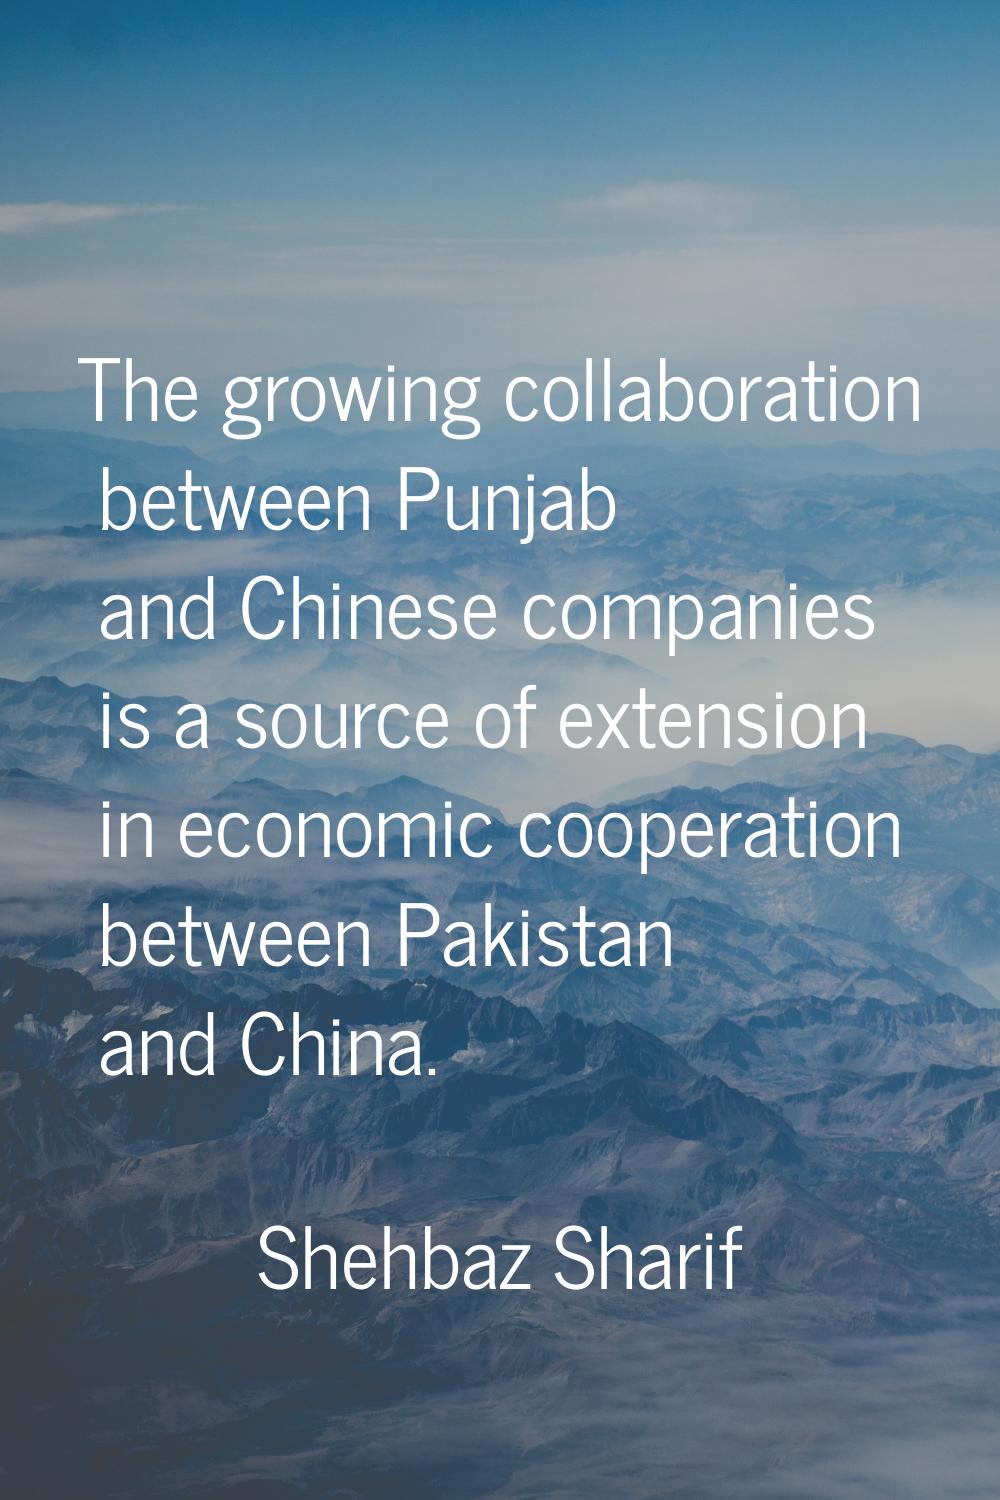 The growing collaboration between Punjab and Chinese companies is a source of extension in economic